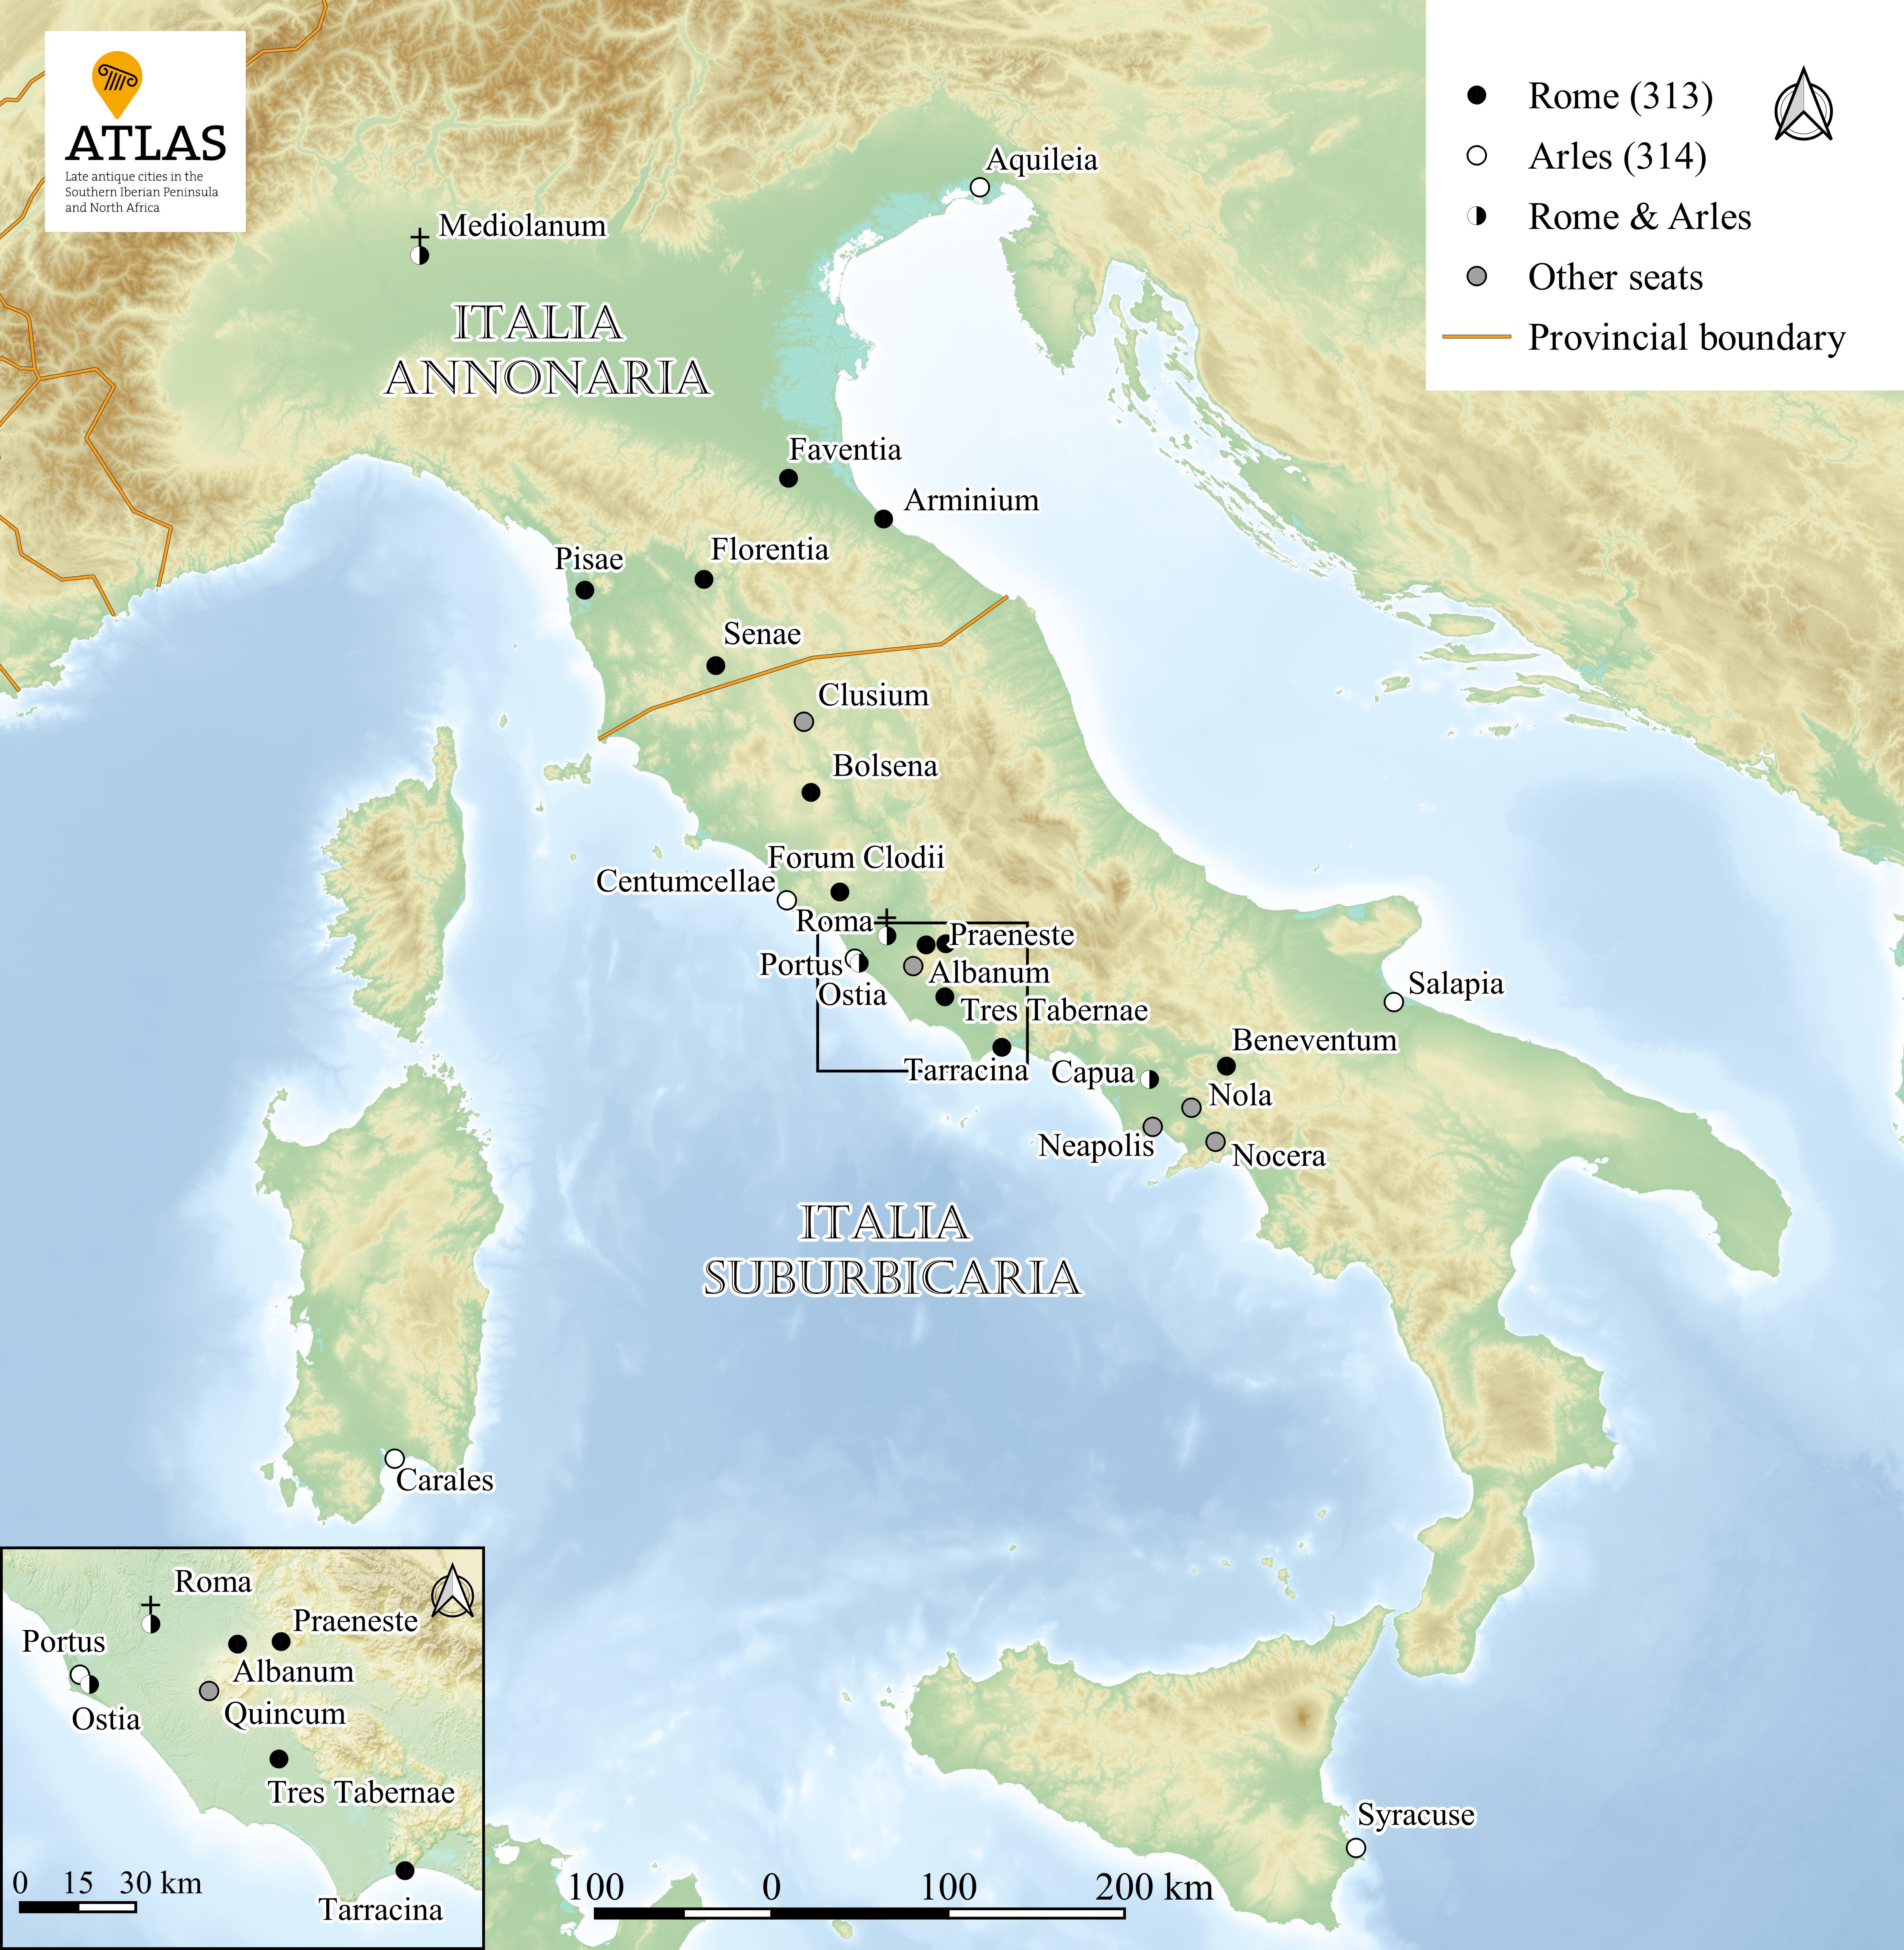 The places of origin of the Bishops present at the councils of Rome (314) and Arles (315)